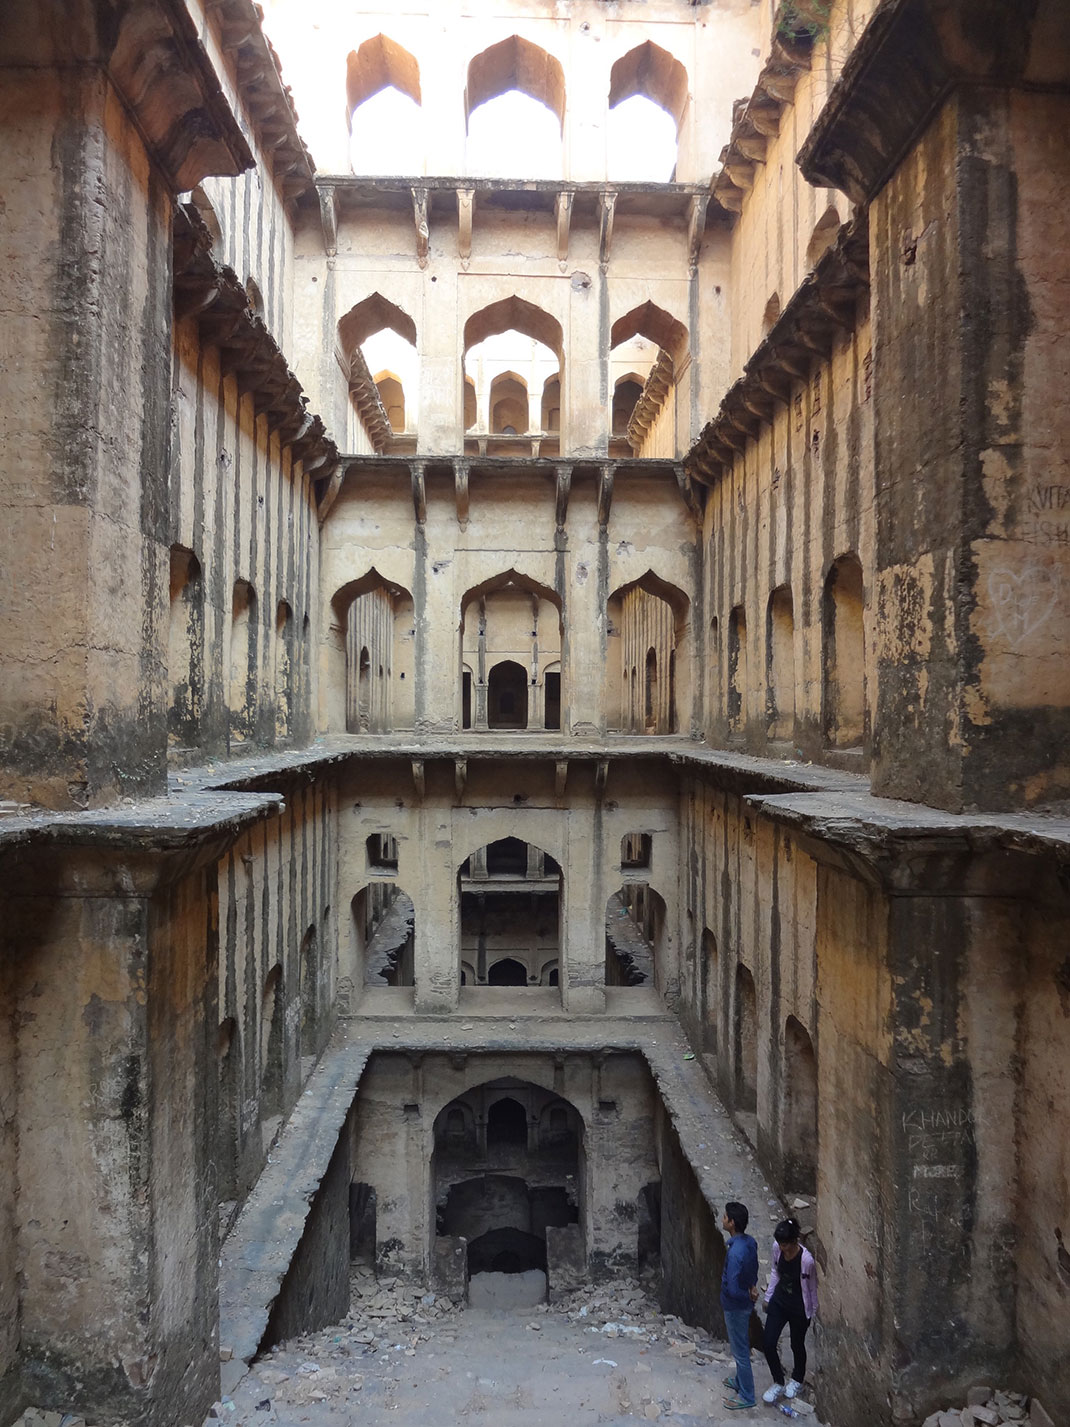 Admire These 2000 Year Old Somptous Buildings In India Destined To Disappear-14